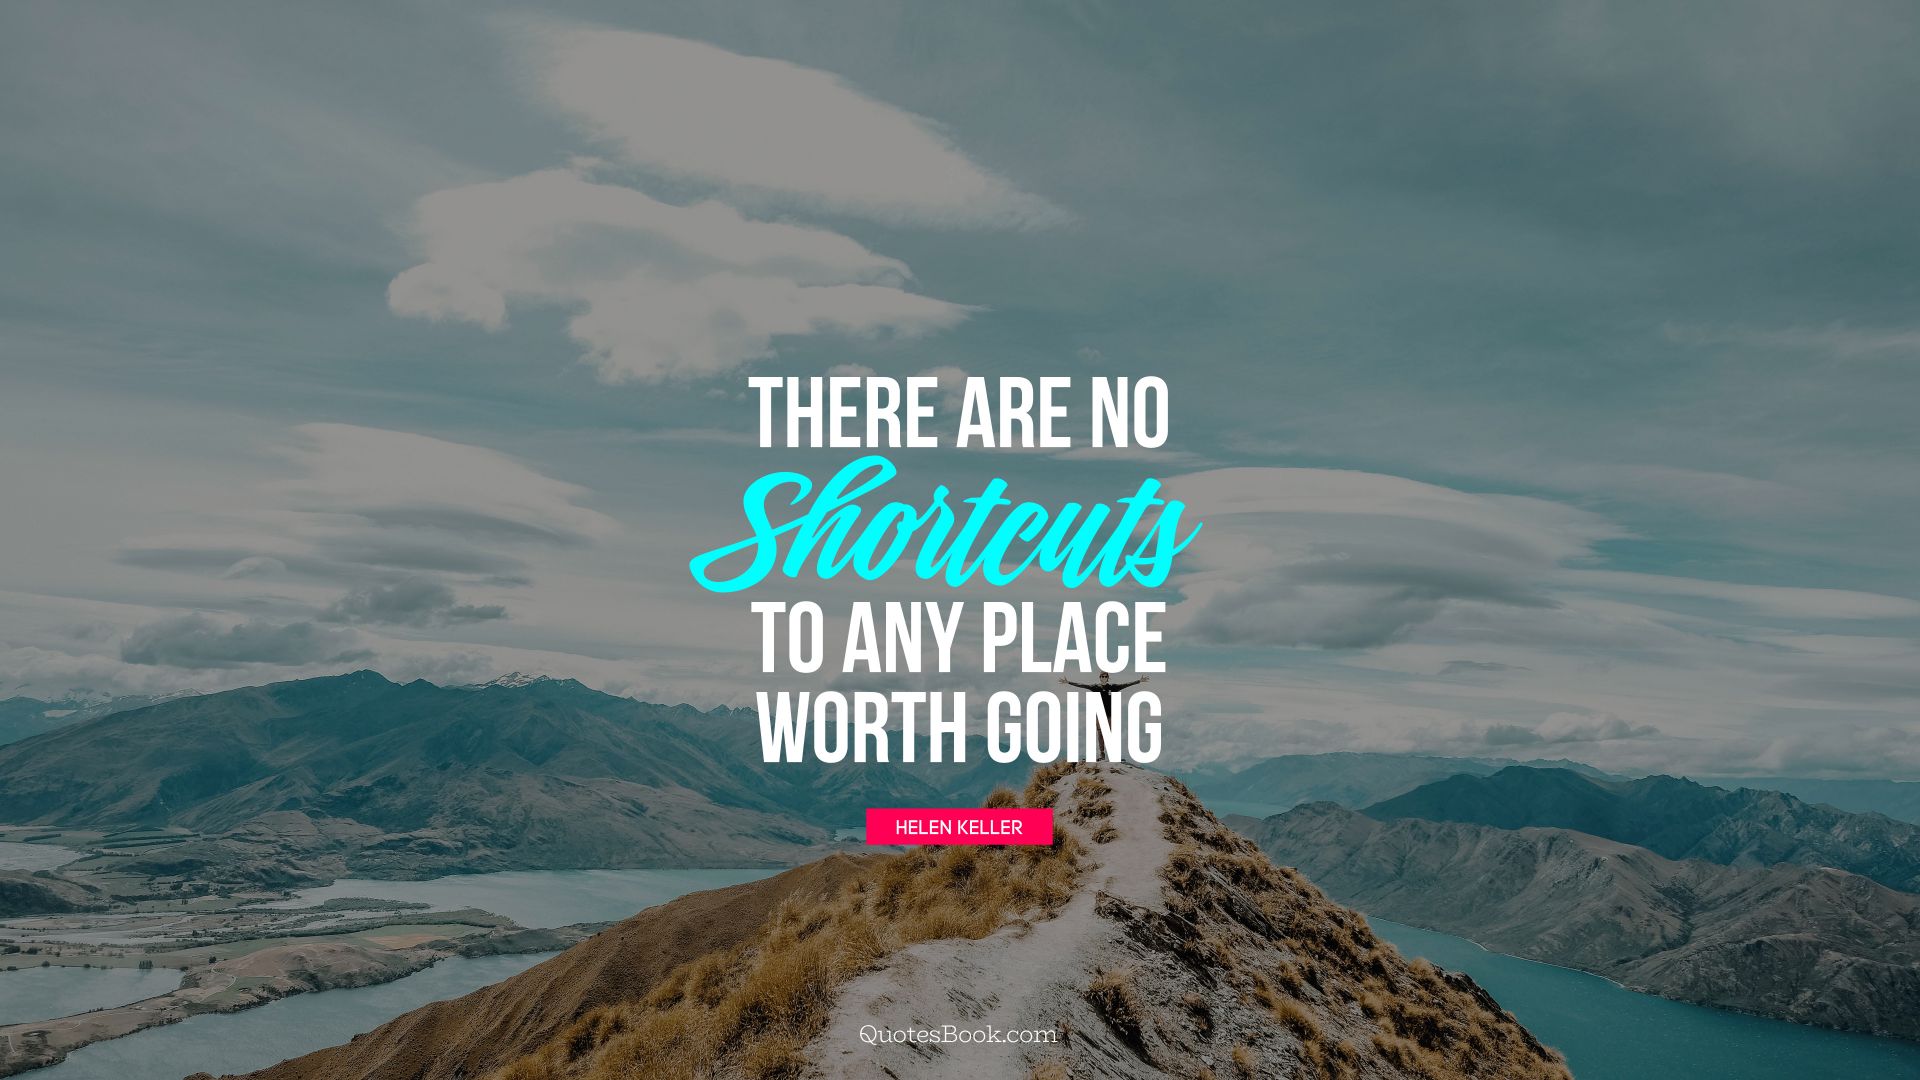 There are no shortcuts to any place worth going. - Quote by Helen Keller